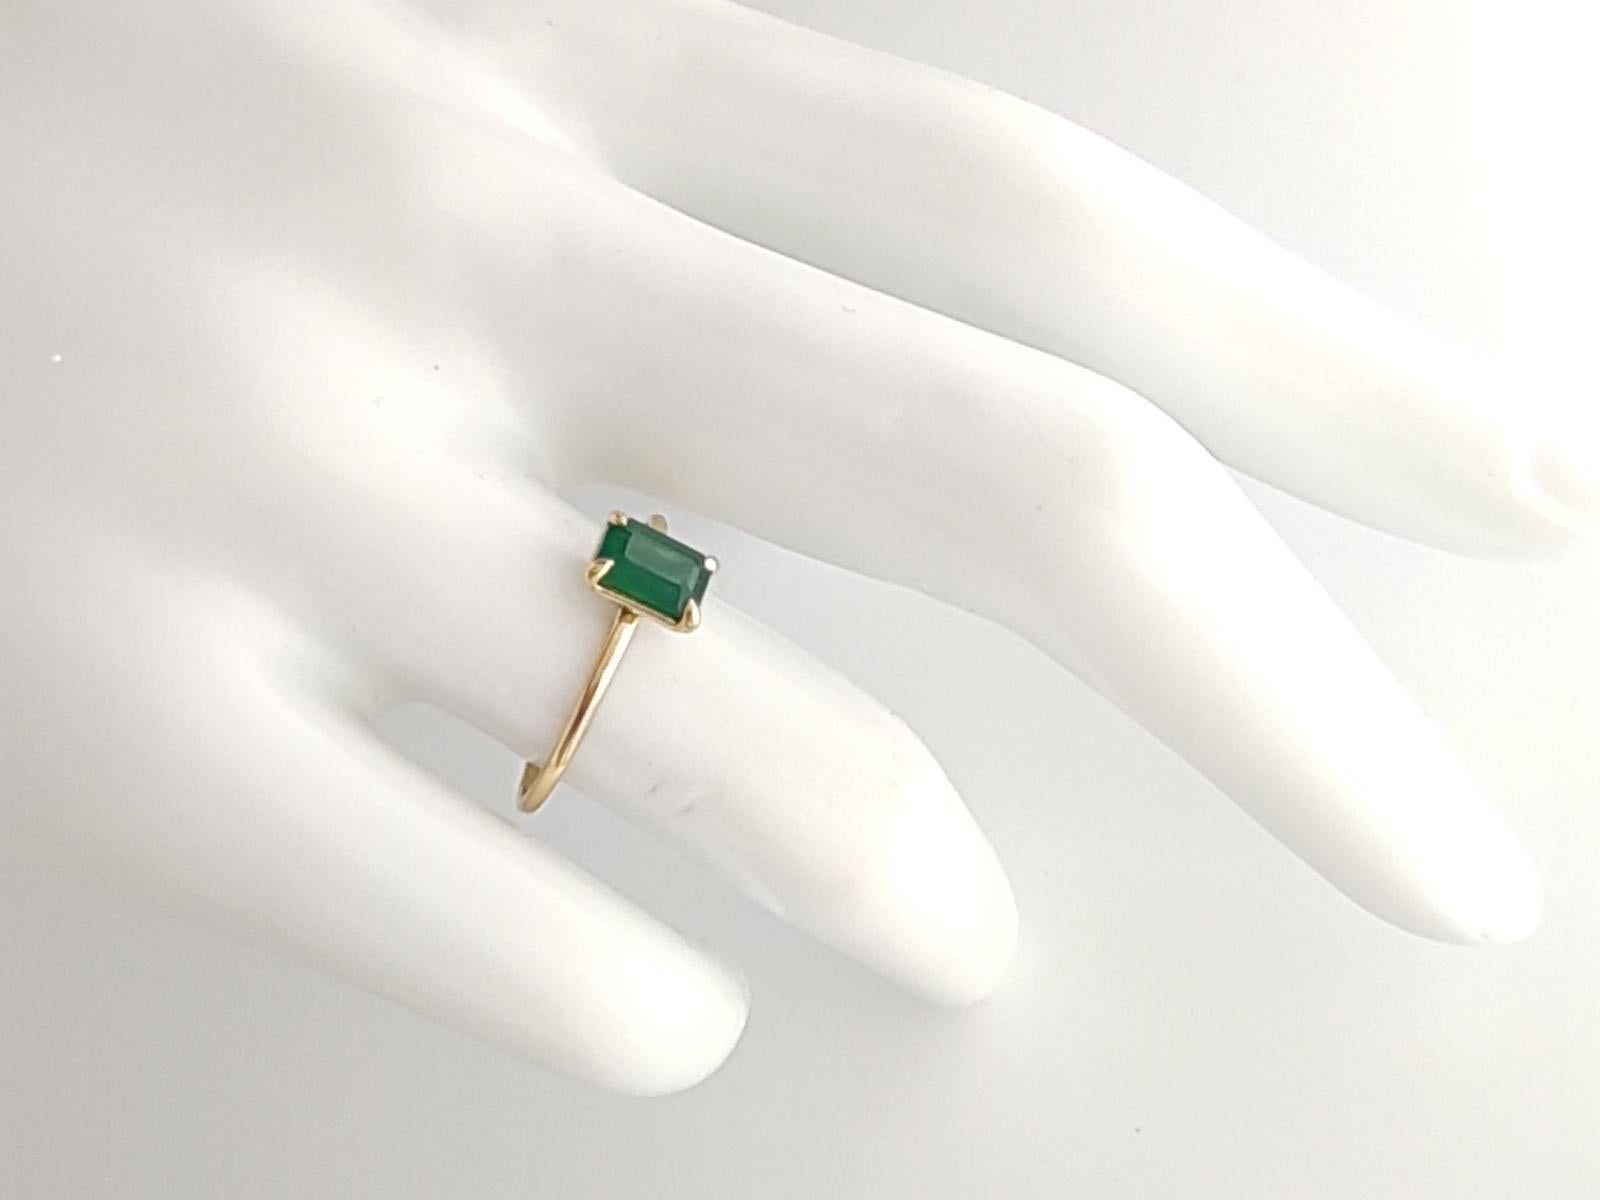 Emerald Cut 0.56ct Emerald in 18K Gold Minimalist Everyday Ring for Elegance and Versatility For Sale